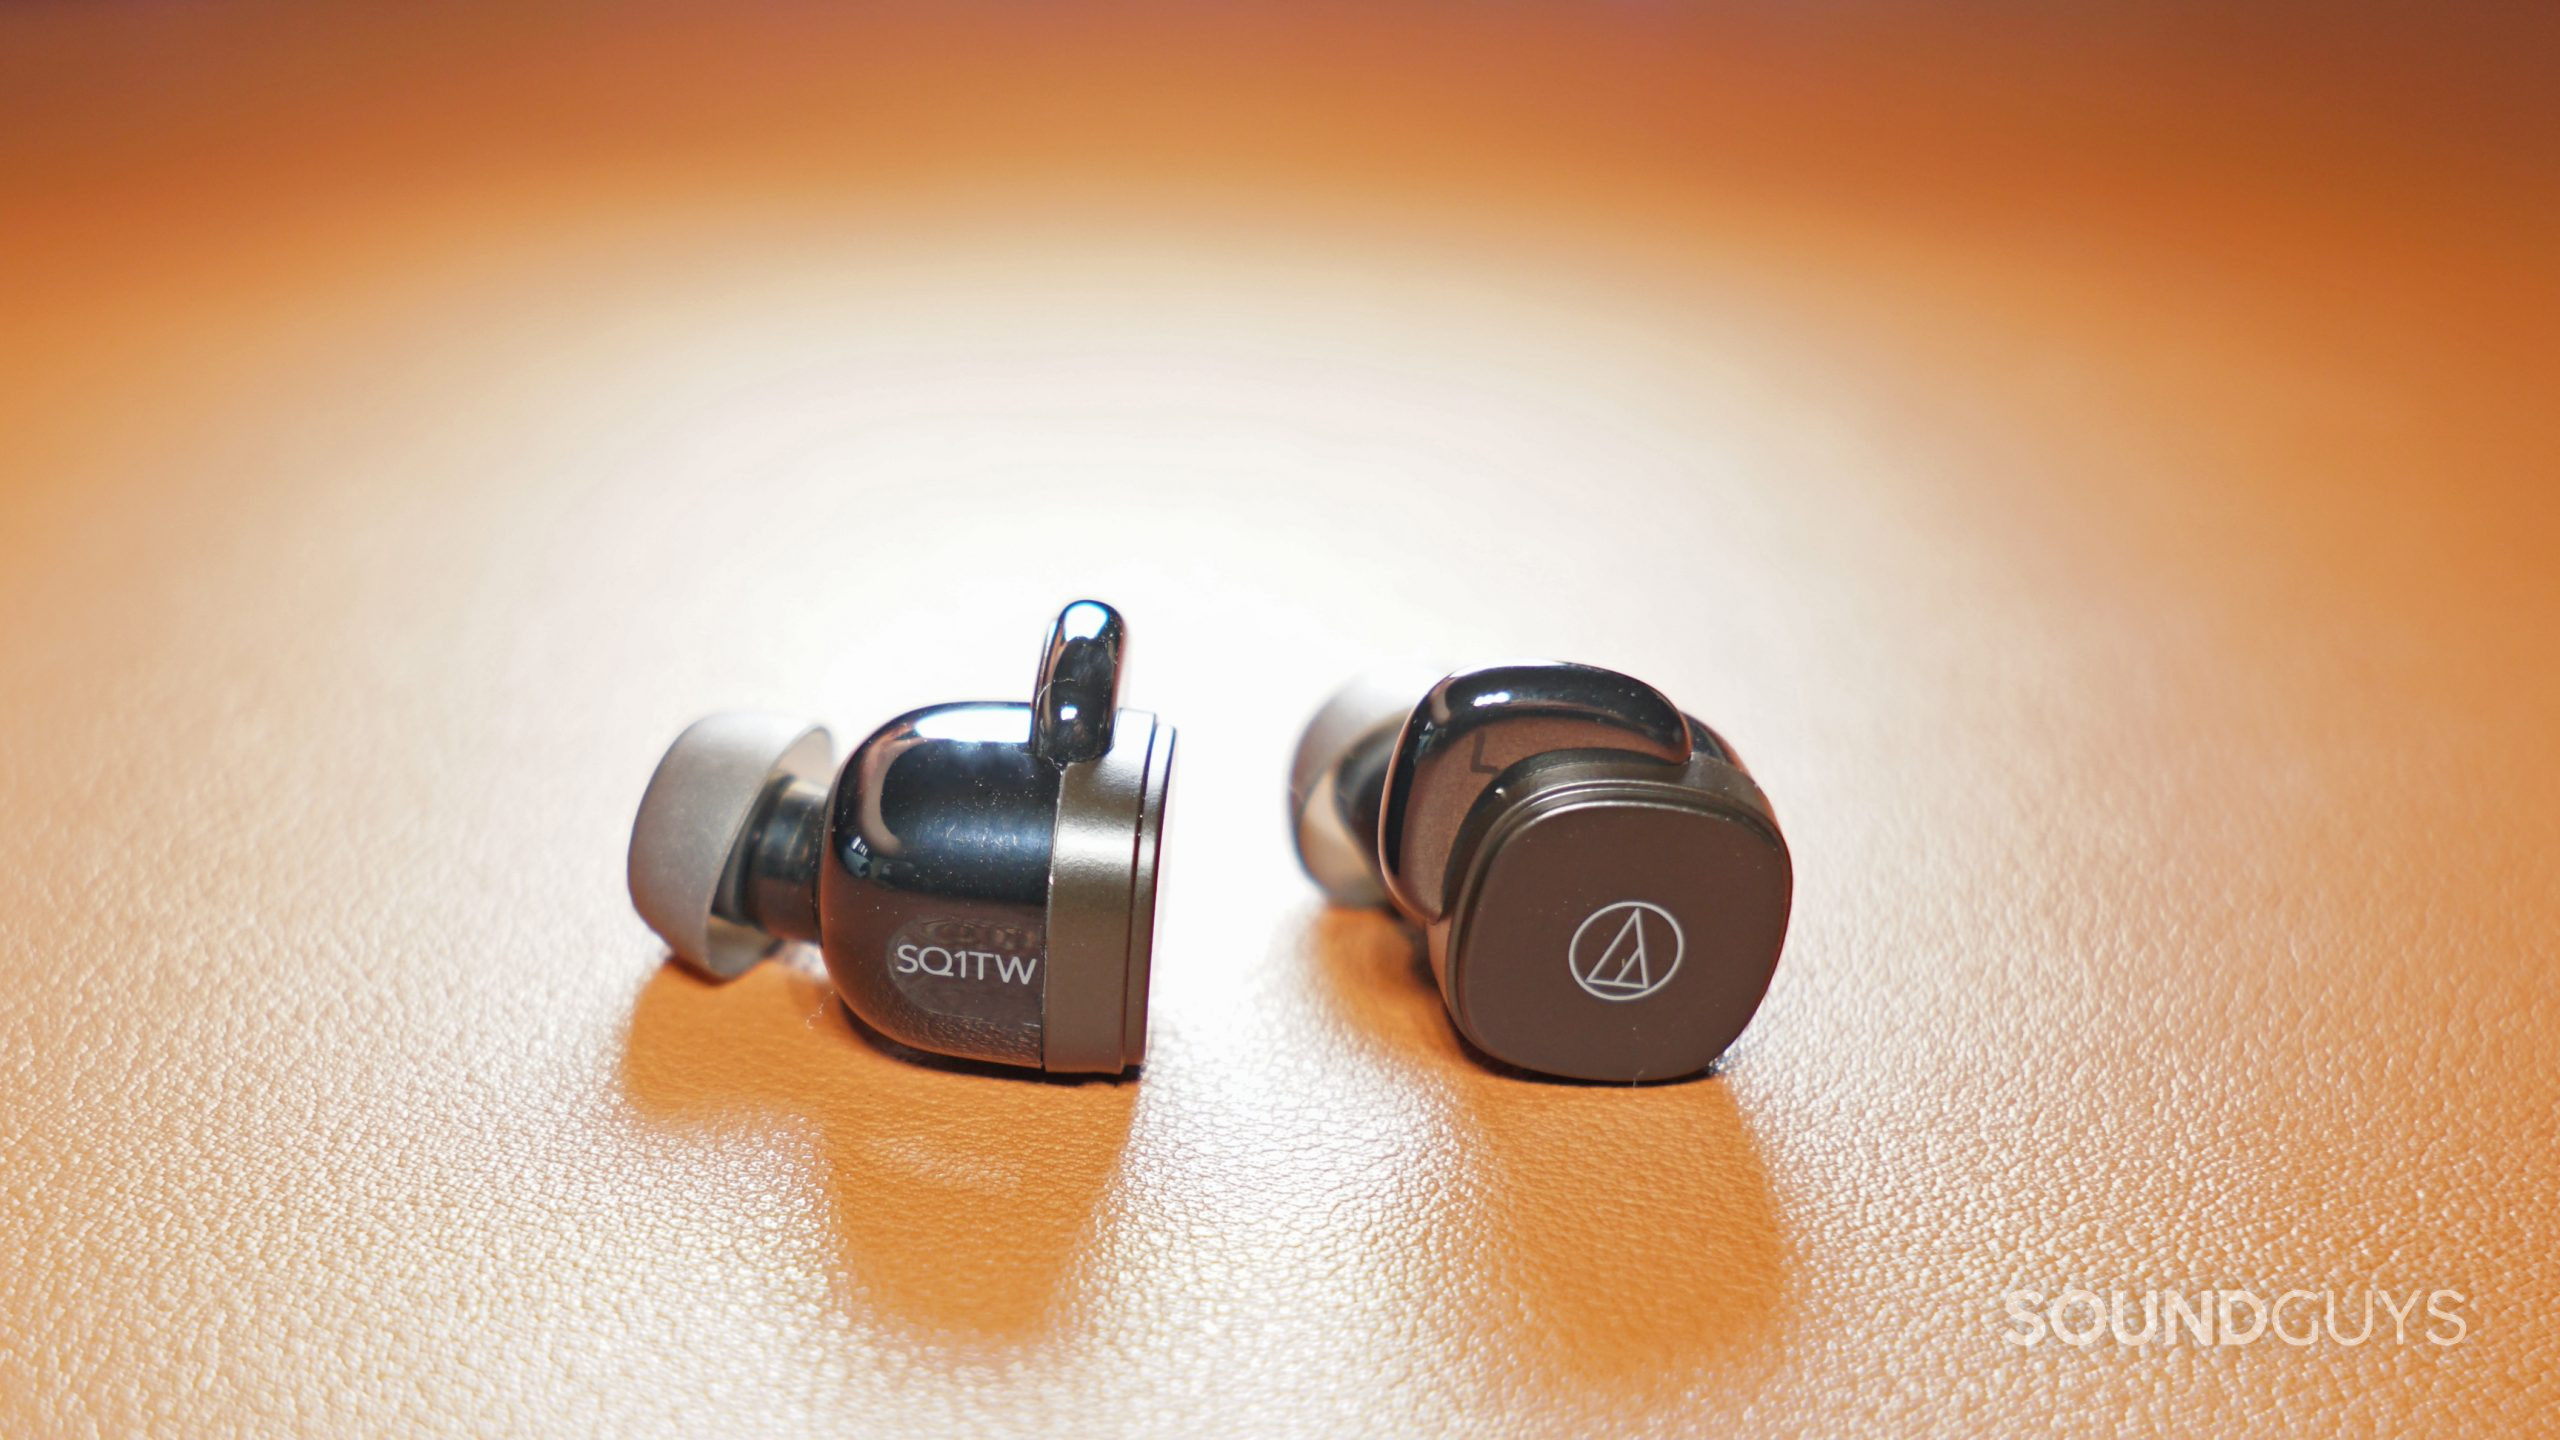 The Audio-Technica ATH-SQ1TW lay on a leather surface.